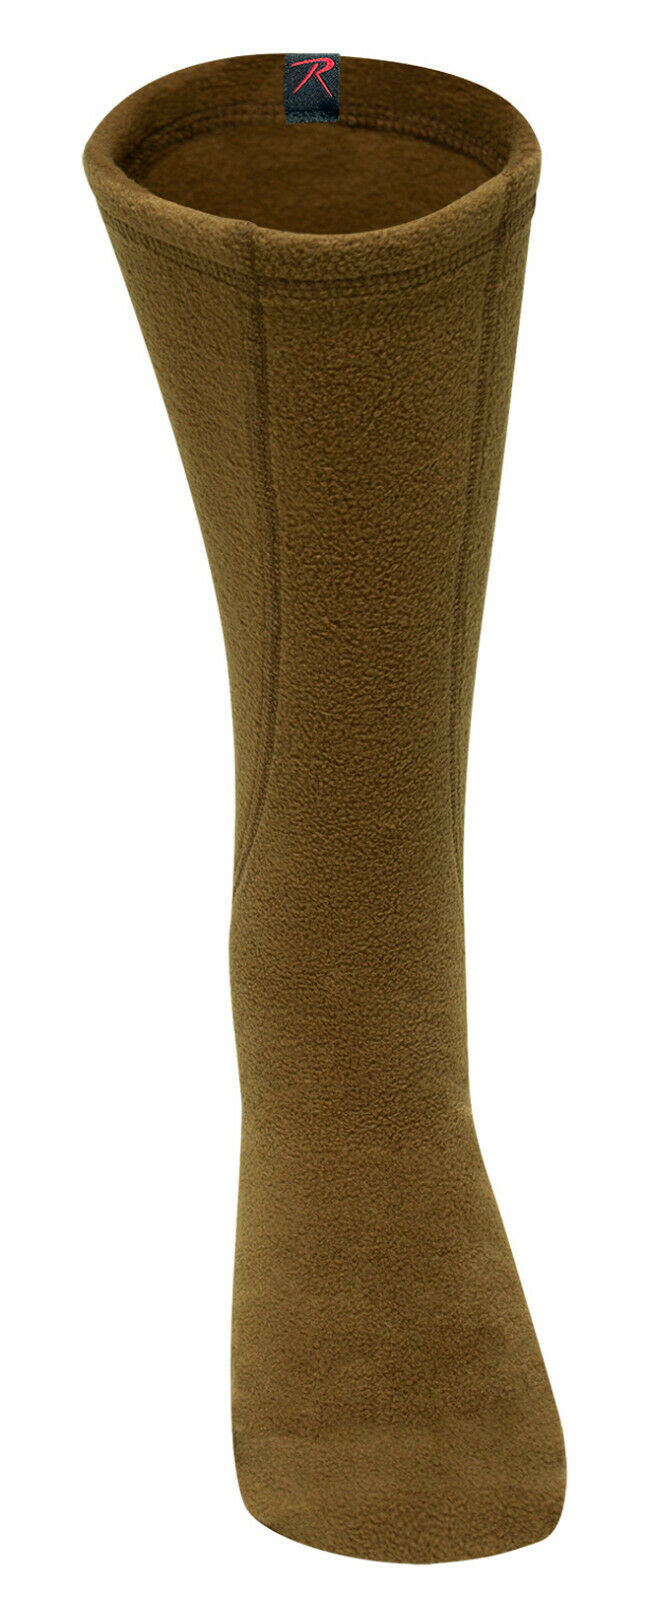 Brown Polar Fleece Boot Over Sock Liners Warm Comfy Cold Weather Feet Protection